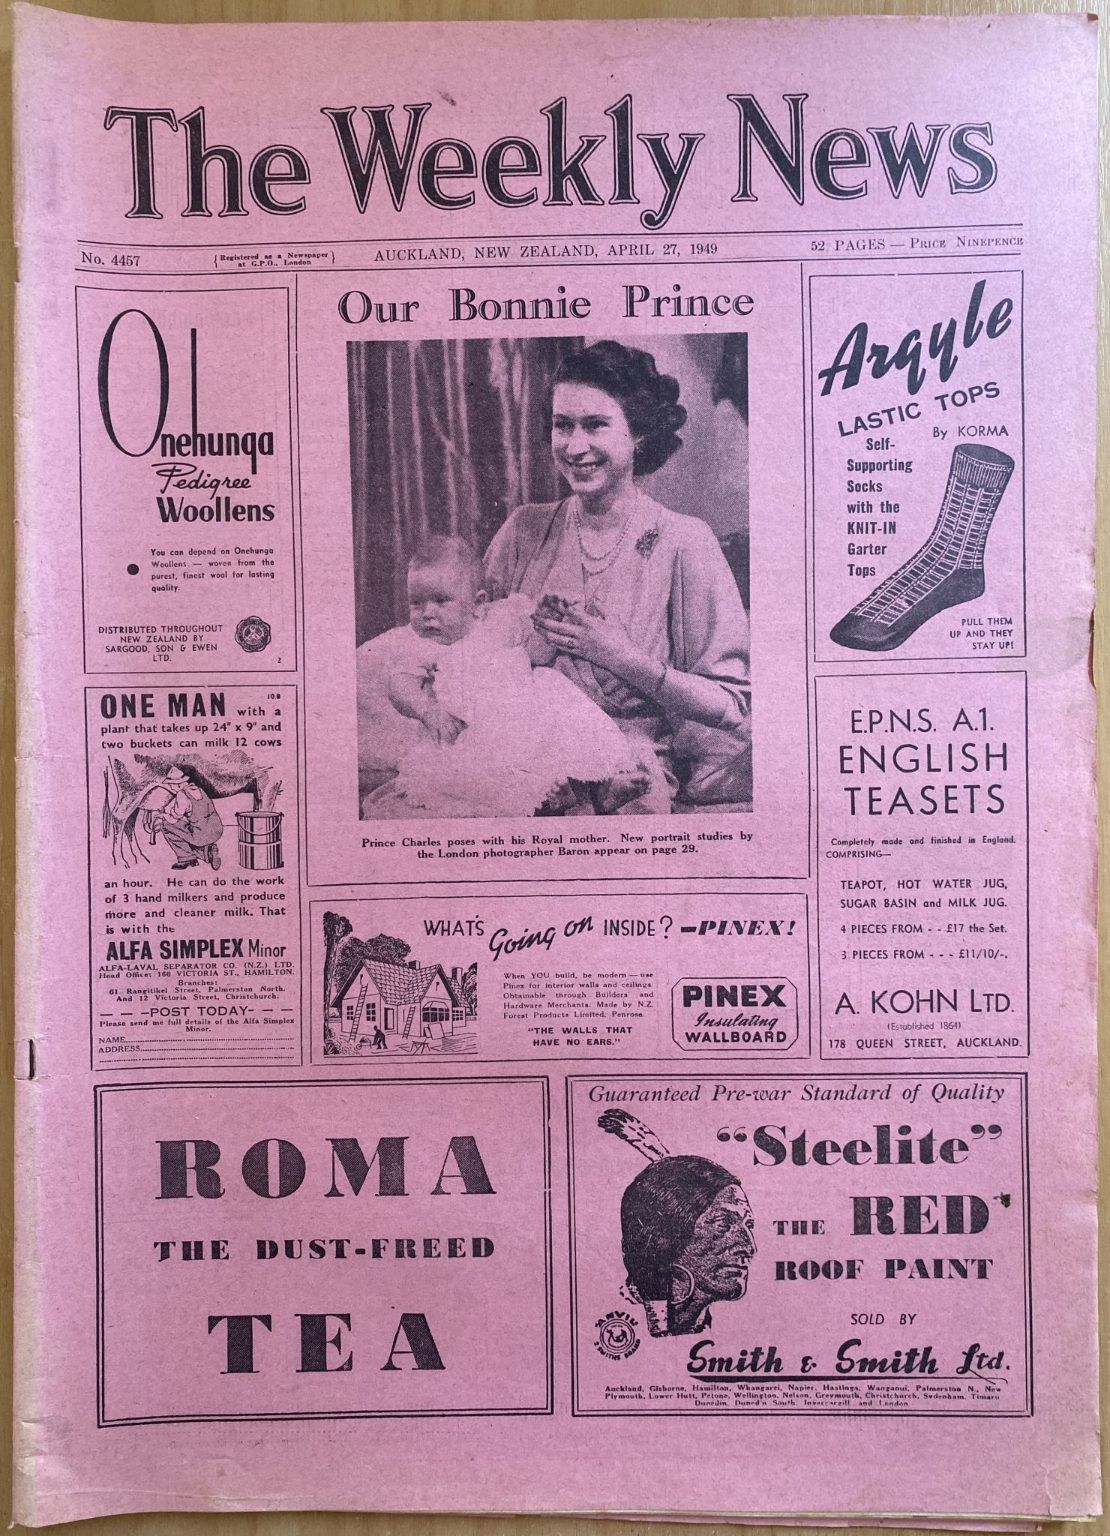 OLD NEWSPAPER: The Weekly News, No. 4457, 27 April 1949